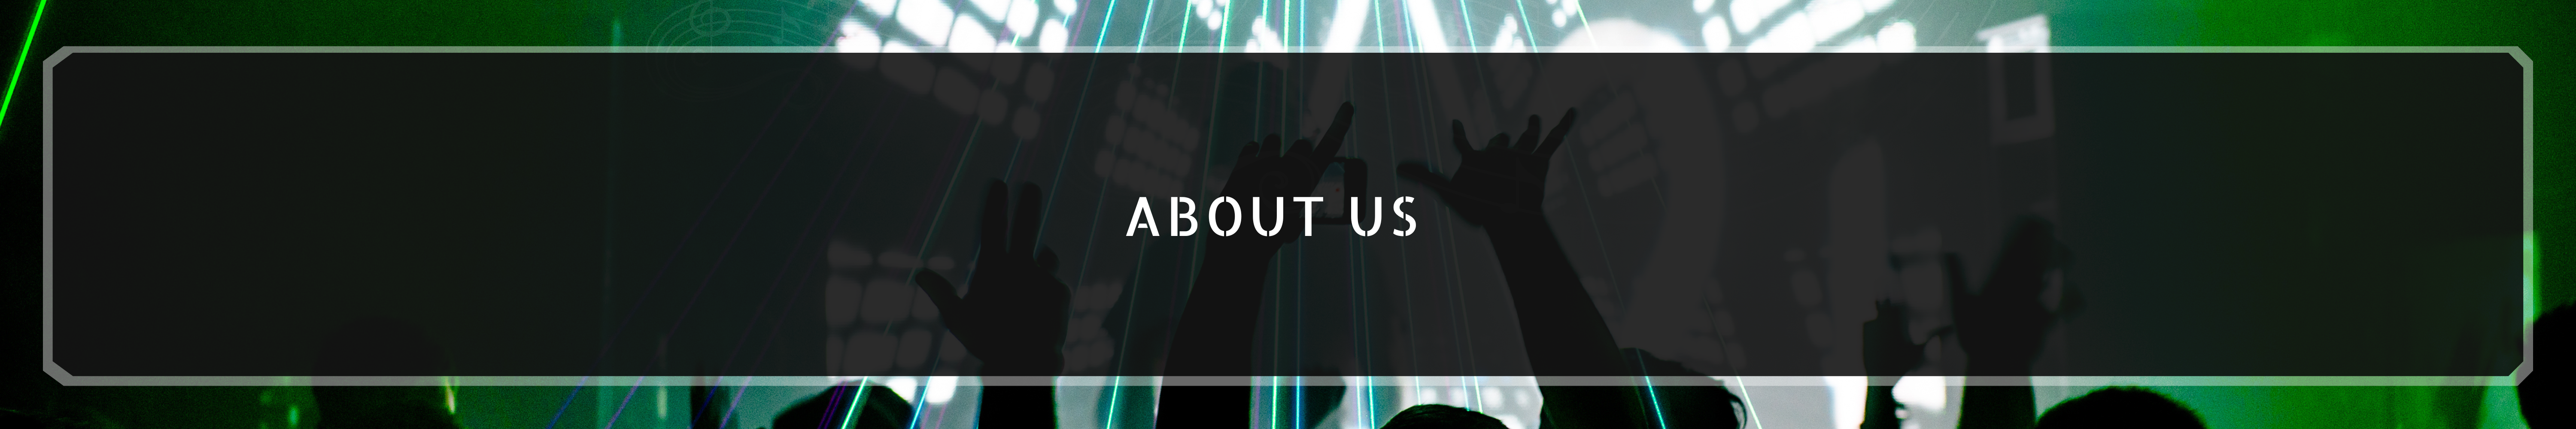 About Us Header